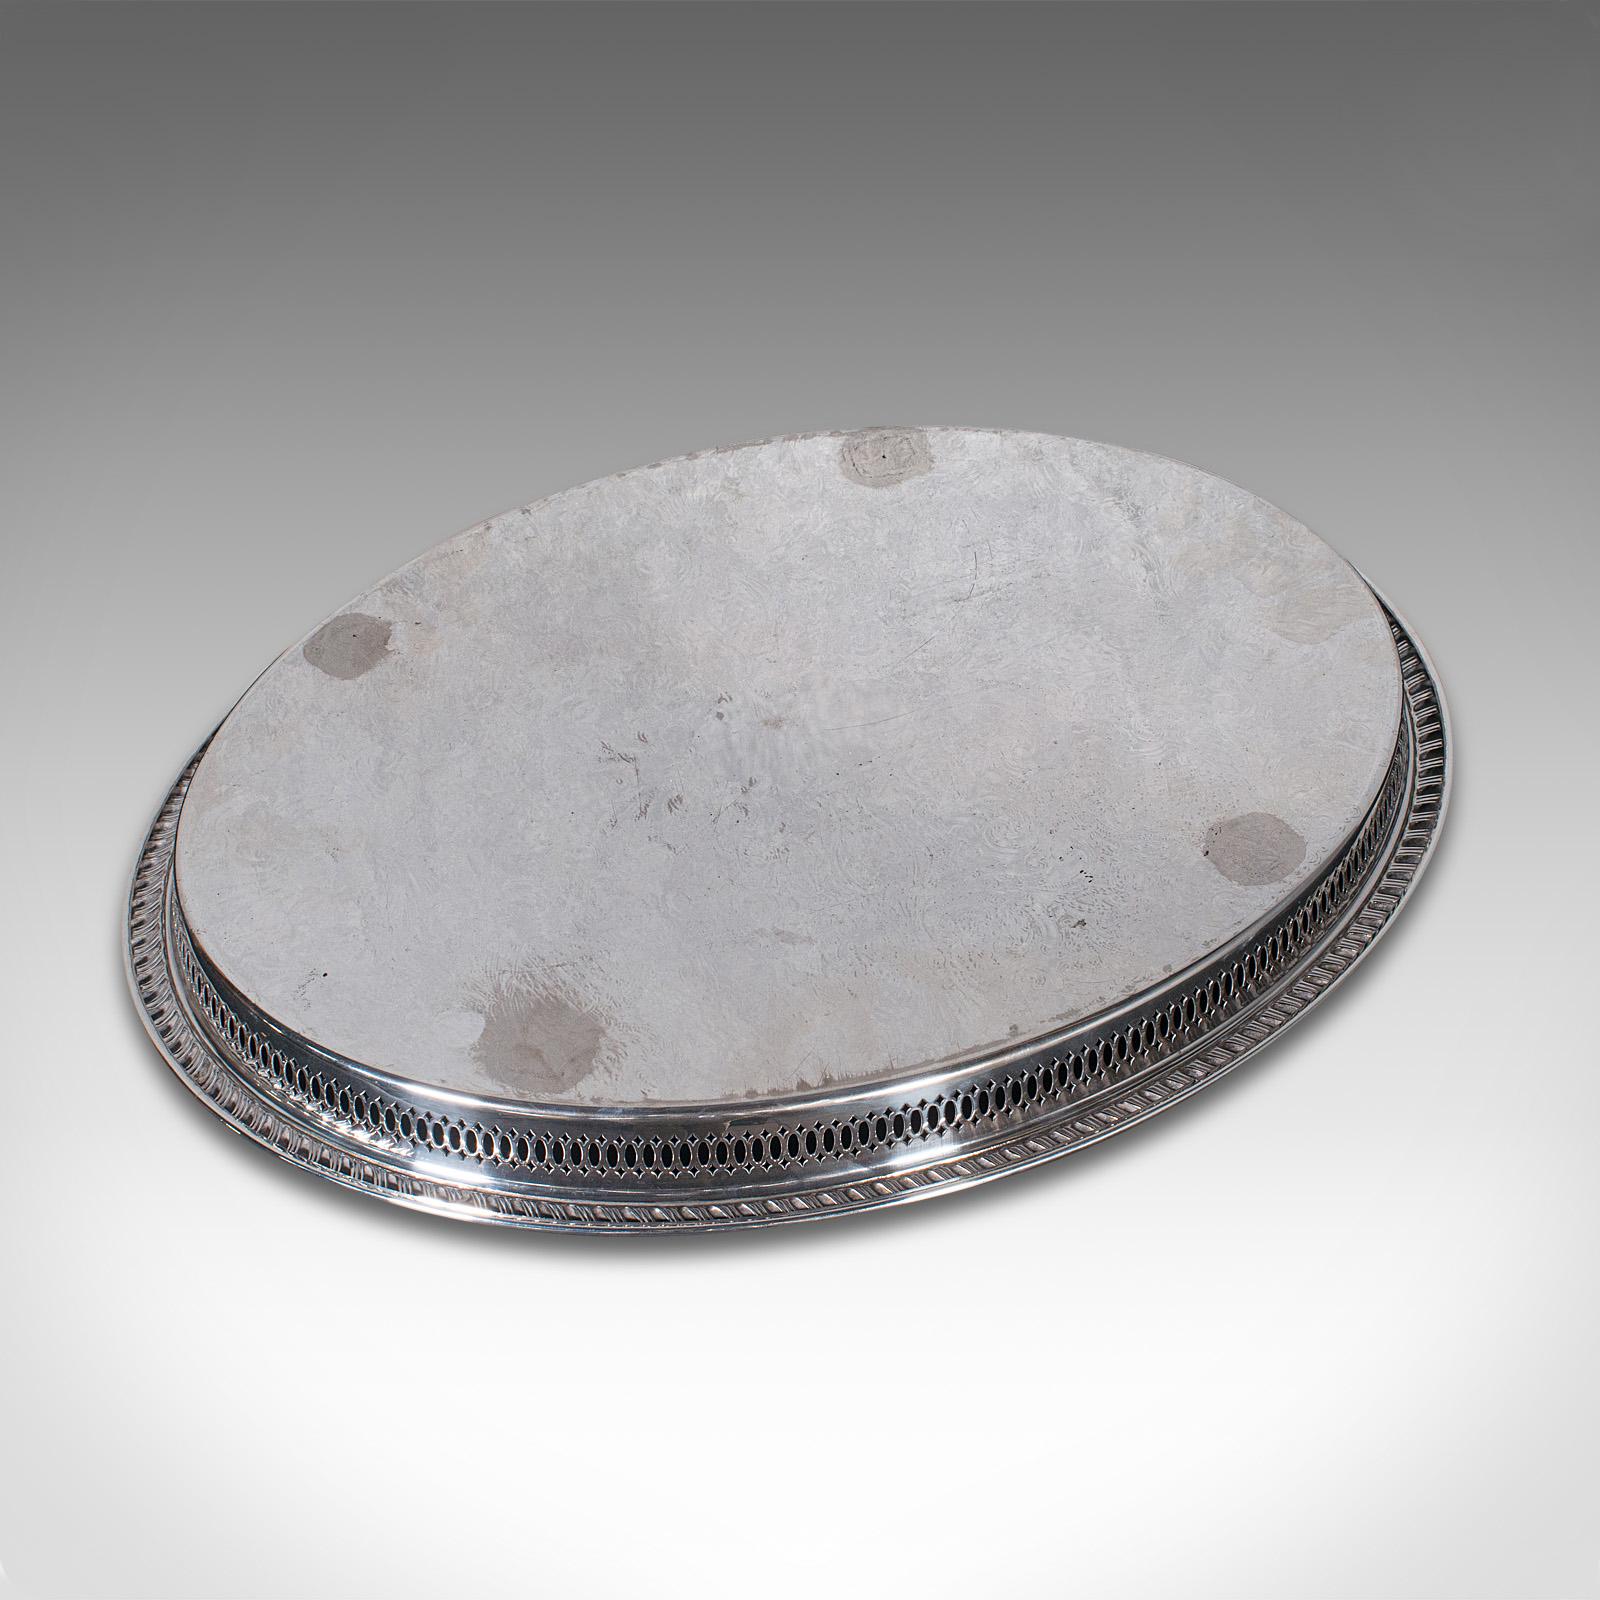 Vintage Oval Serving Tray, English Silver Plate, Afternoon Tea, Decorative, 1950 For Sale 1